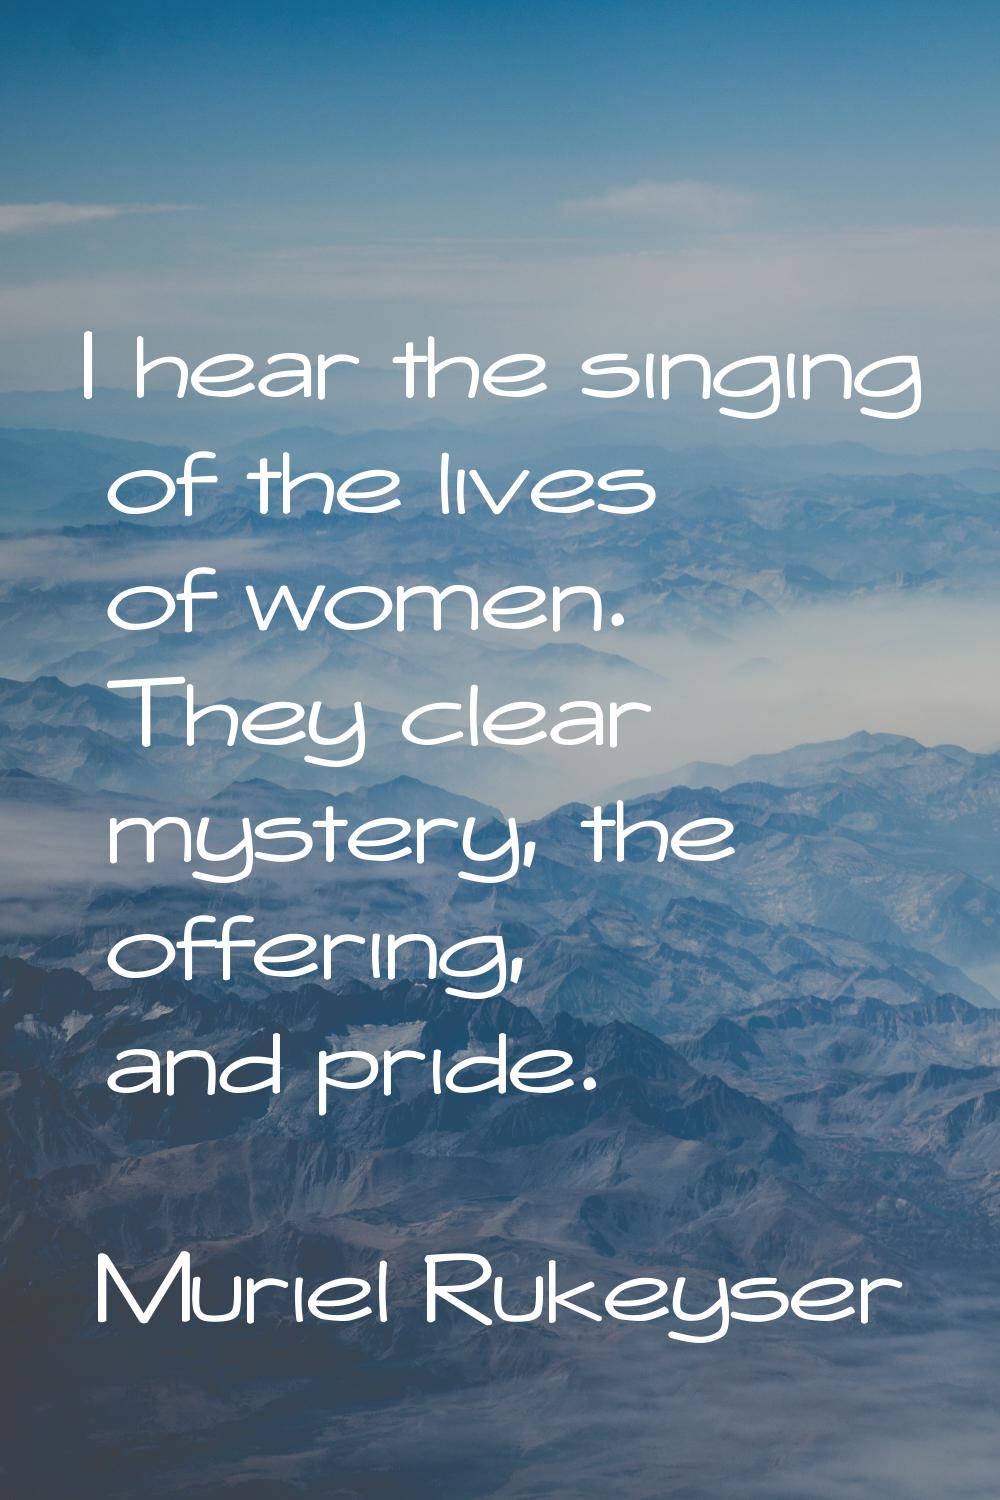 I hear the singing of the lives of women. They clear mystery, the offering, and pride.